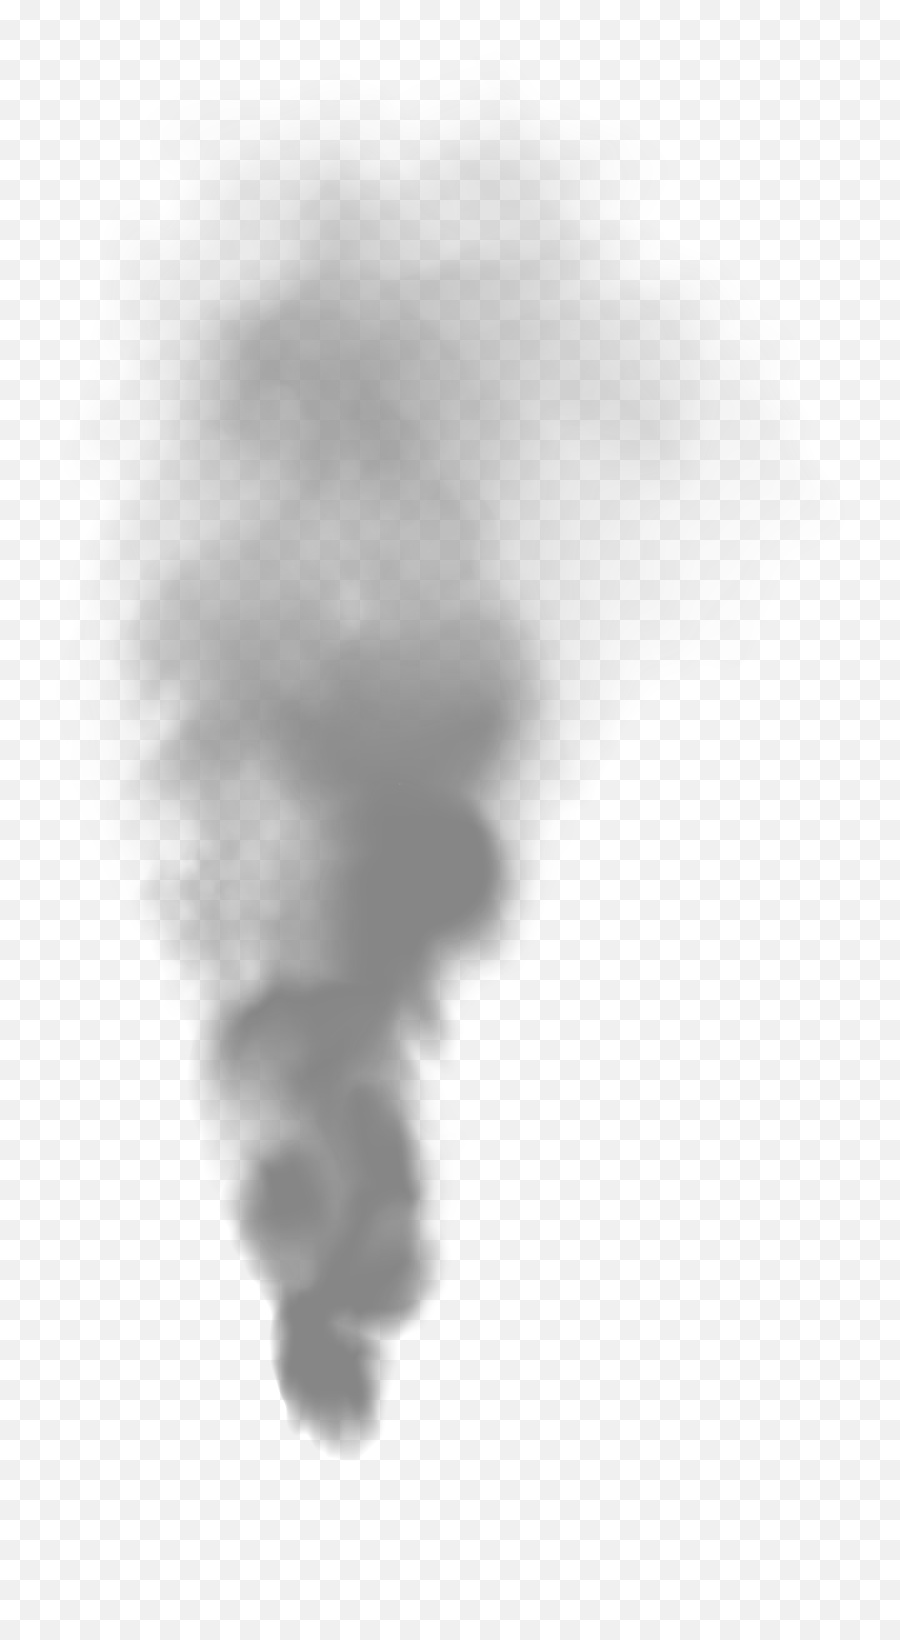 10 Png Red Smoke Pics To Free Download - Clipart Smoke Transparent Background,Smoke Overlay Png